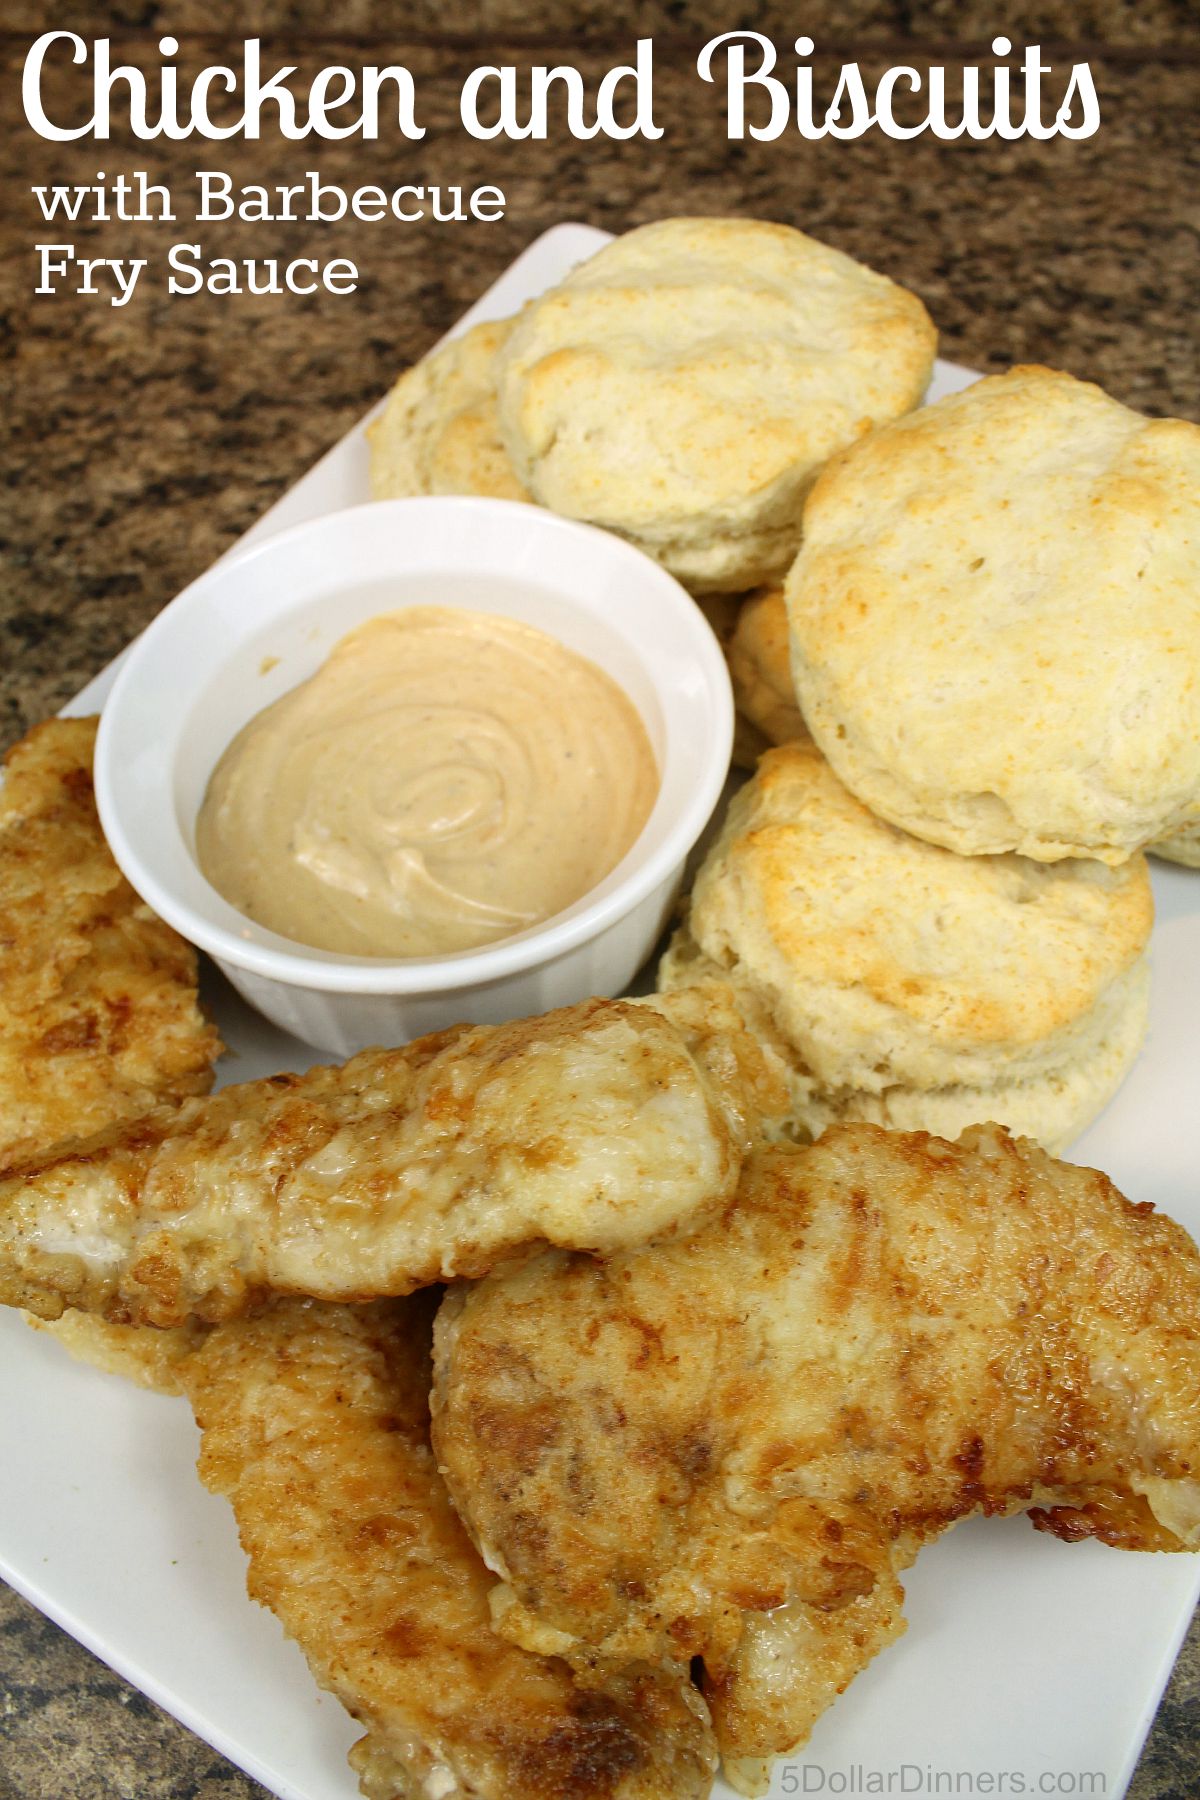 Chicken and Biscuits with BBQ Fry Sauce | 5DollarDinners.com